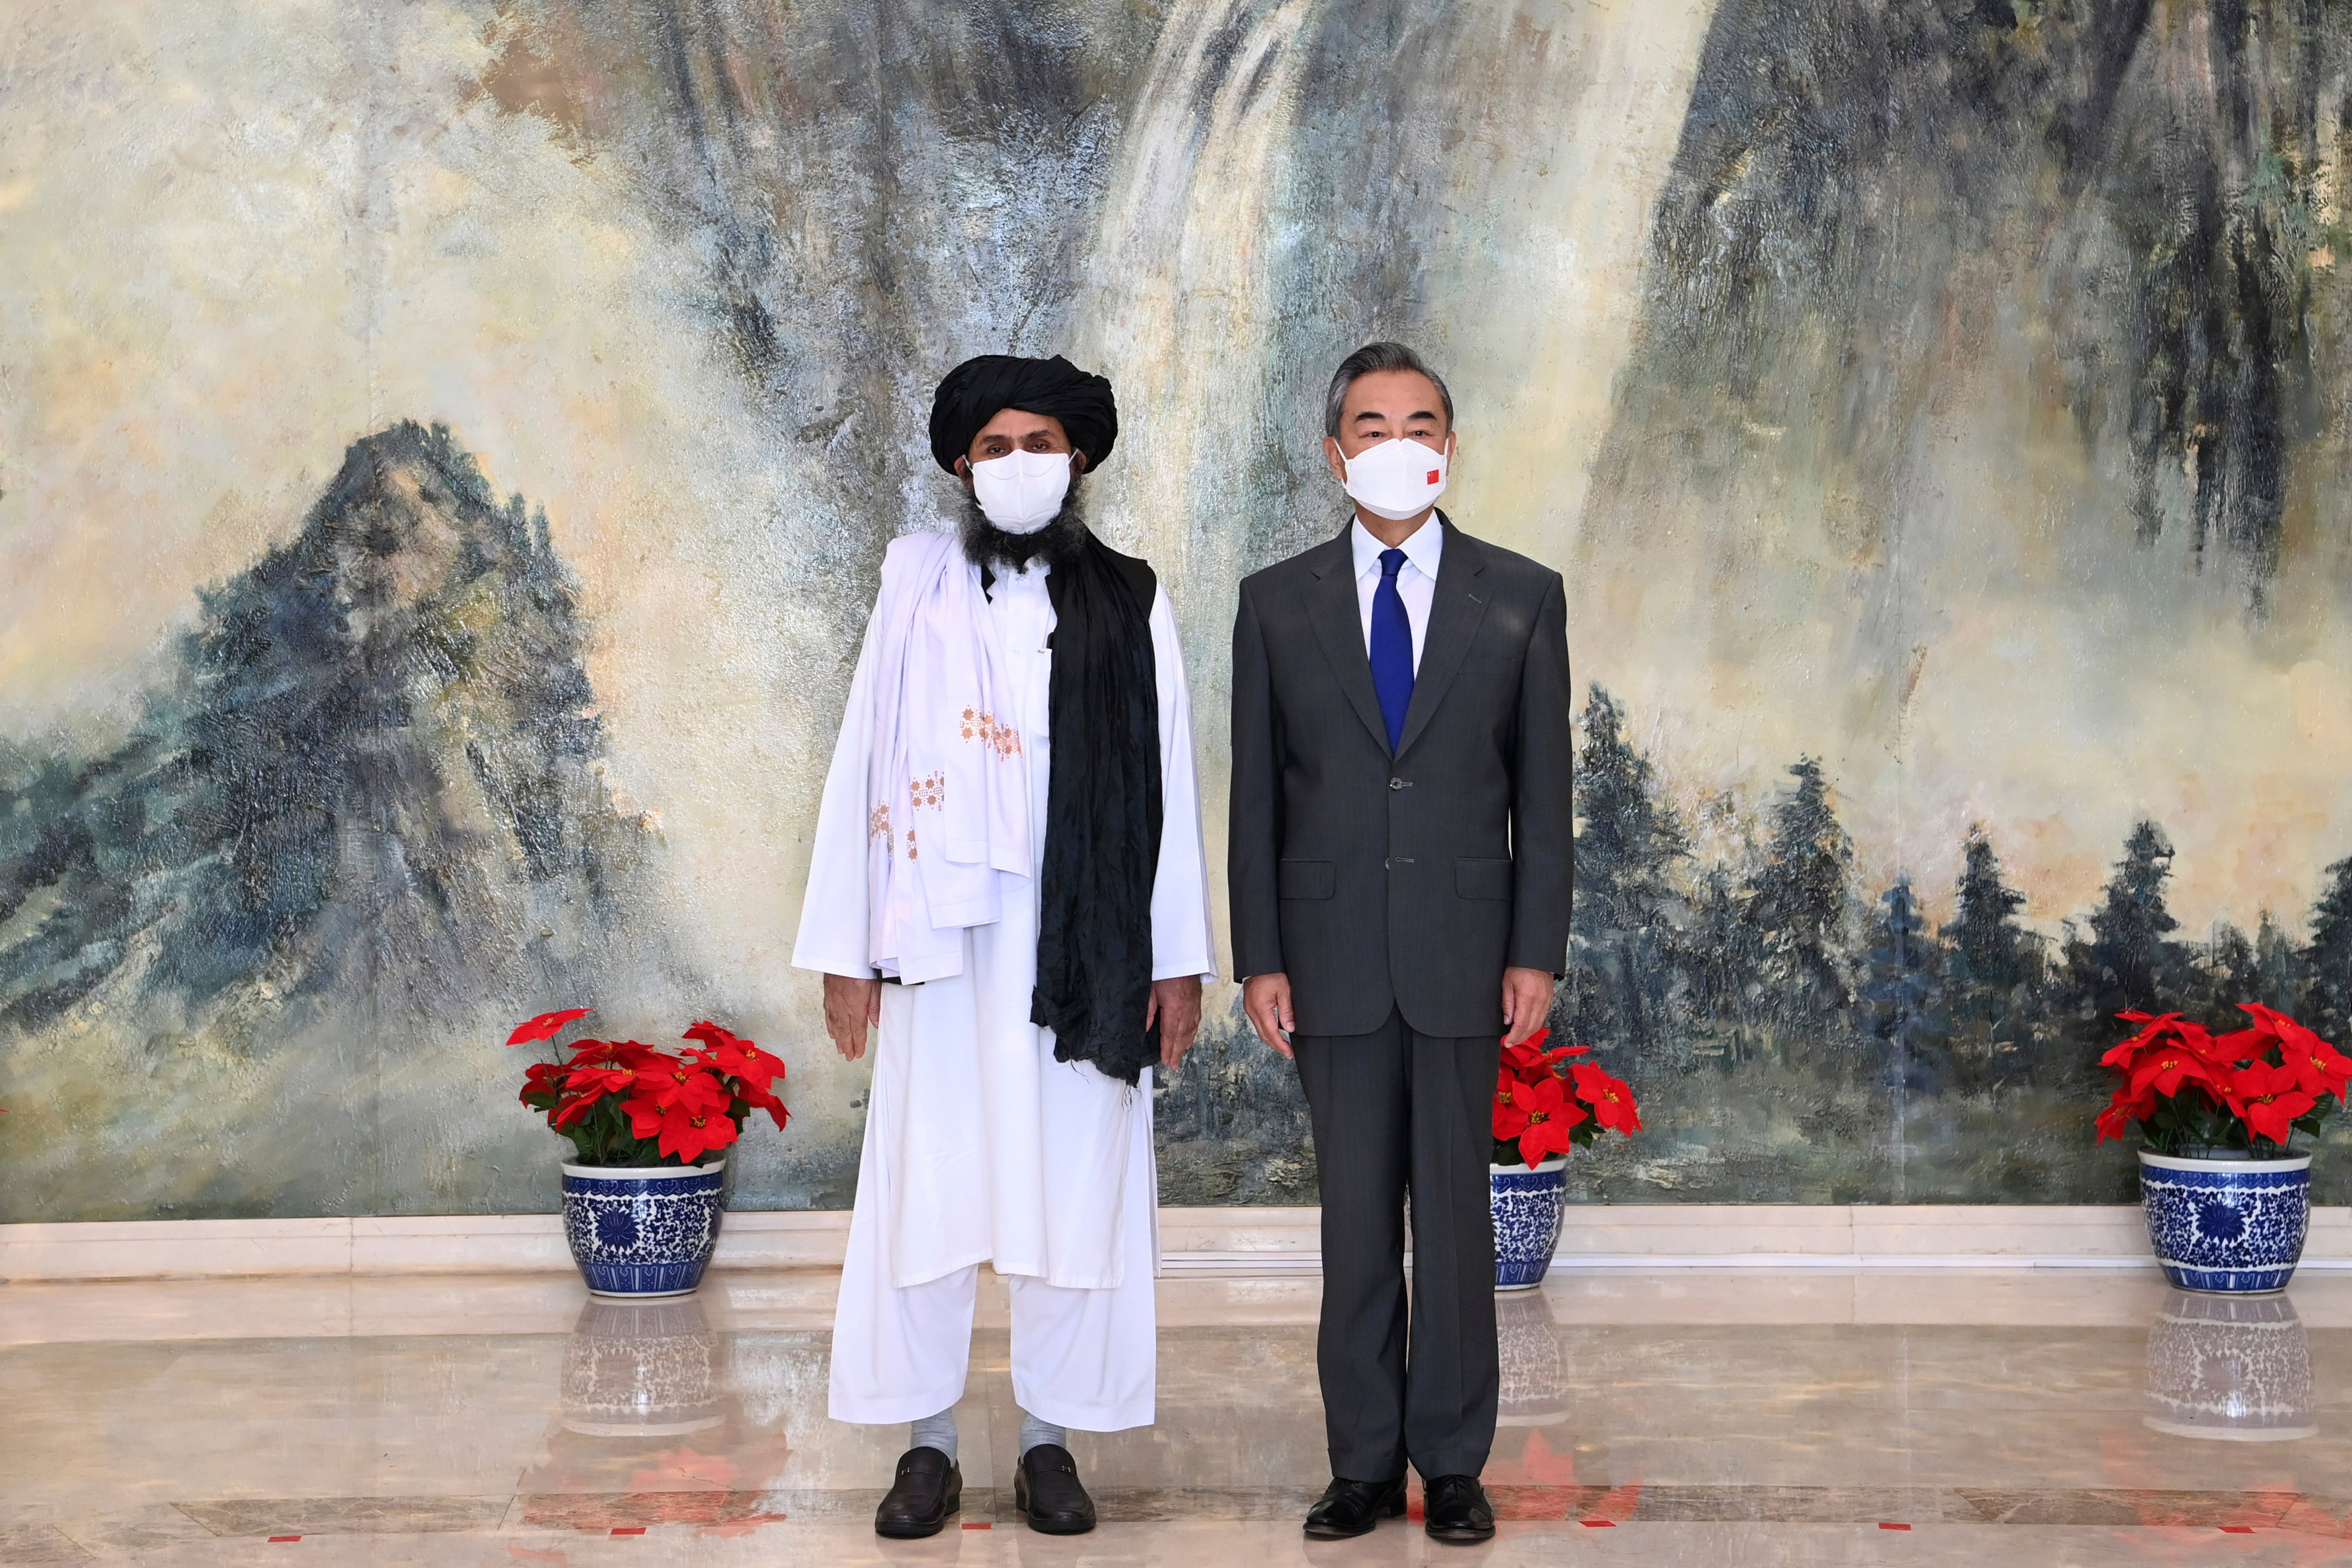 Taliban co-founder Mullah Abdul Ghani Baradar, left, and Chinese Foreign Minister Wang Yi, pose for a photo during their meeting in Tianjin, China